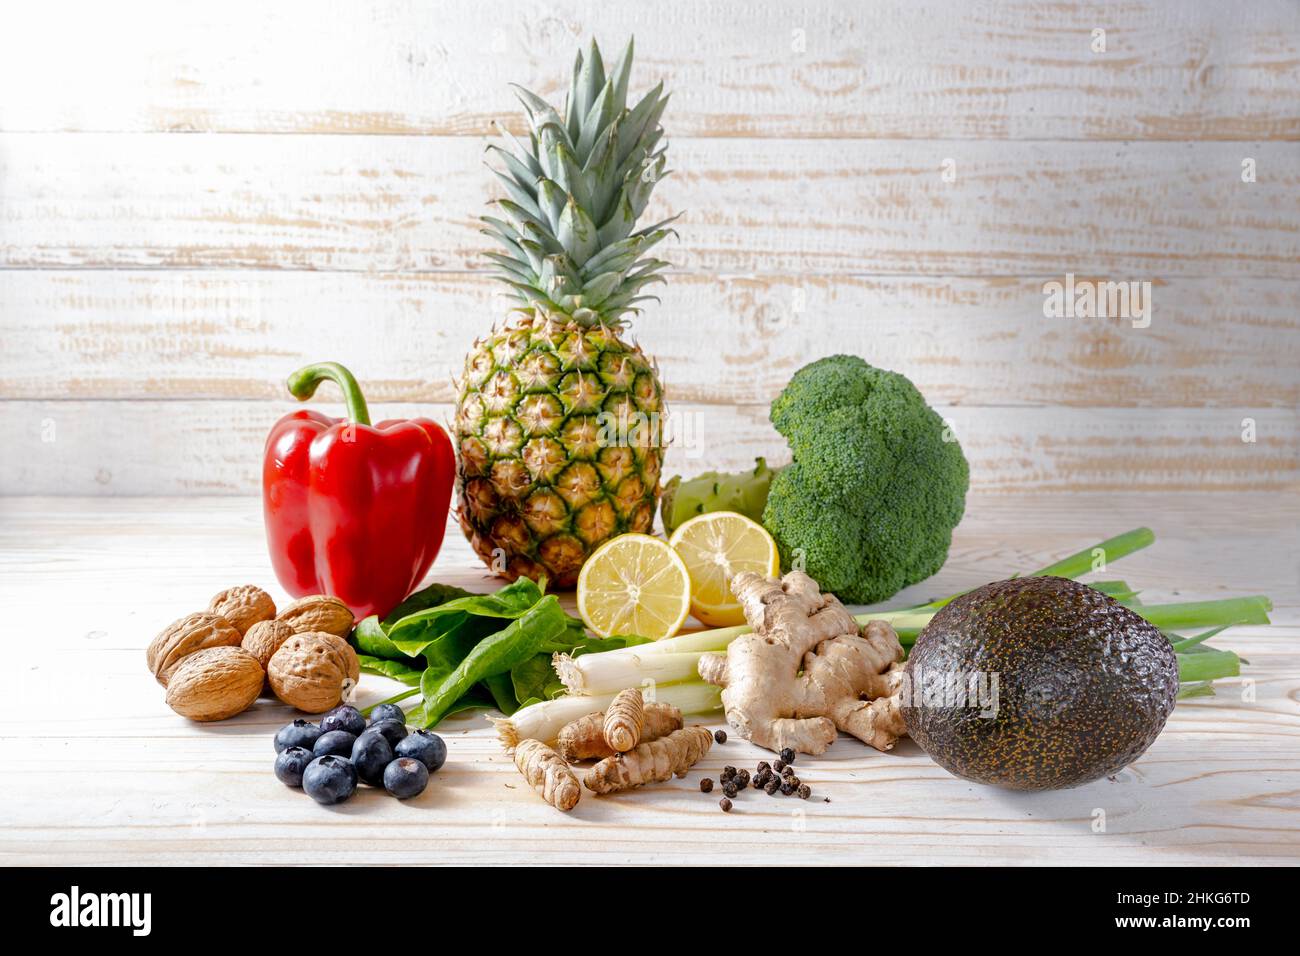 Assortment of healthy food with anti-inflammatory effect like vegetables, nuts, fruits and spices, light wooden background with copy space, selected s Stock Photo